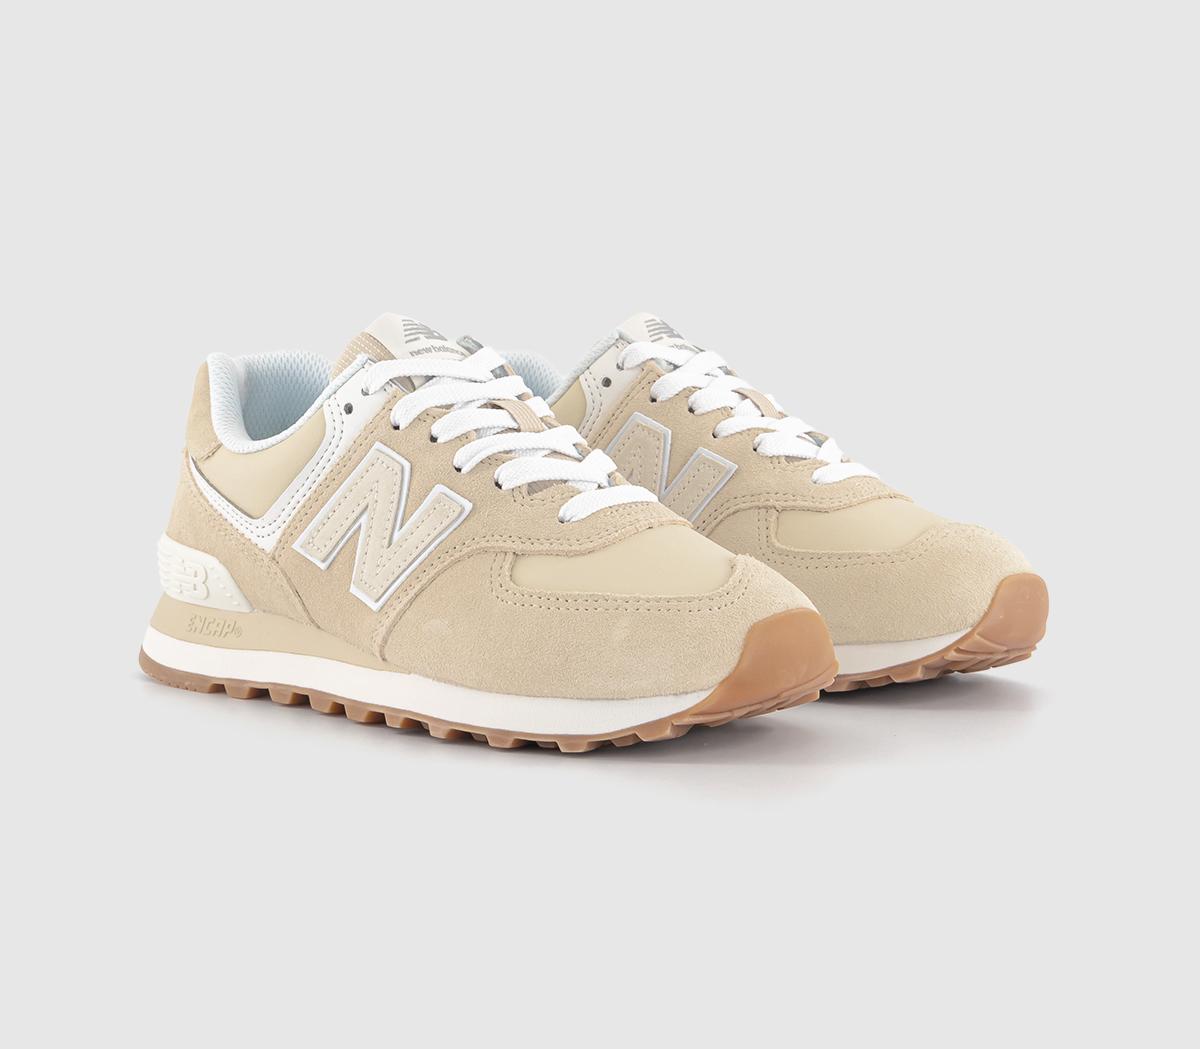 New Balance Mens 574 Trainers Sandstone Natural, 5.5